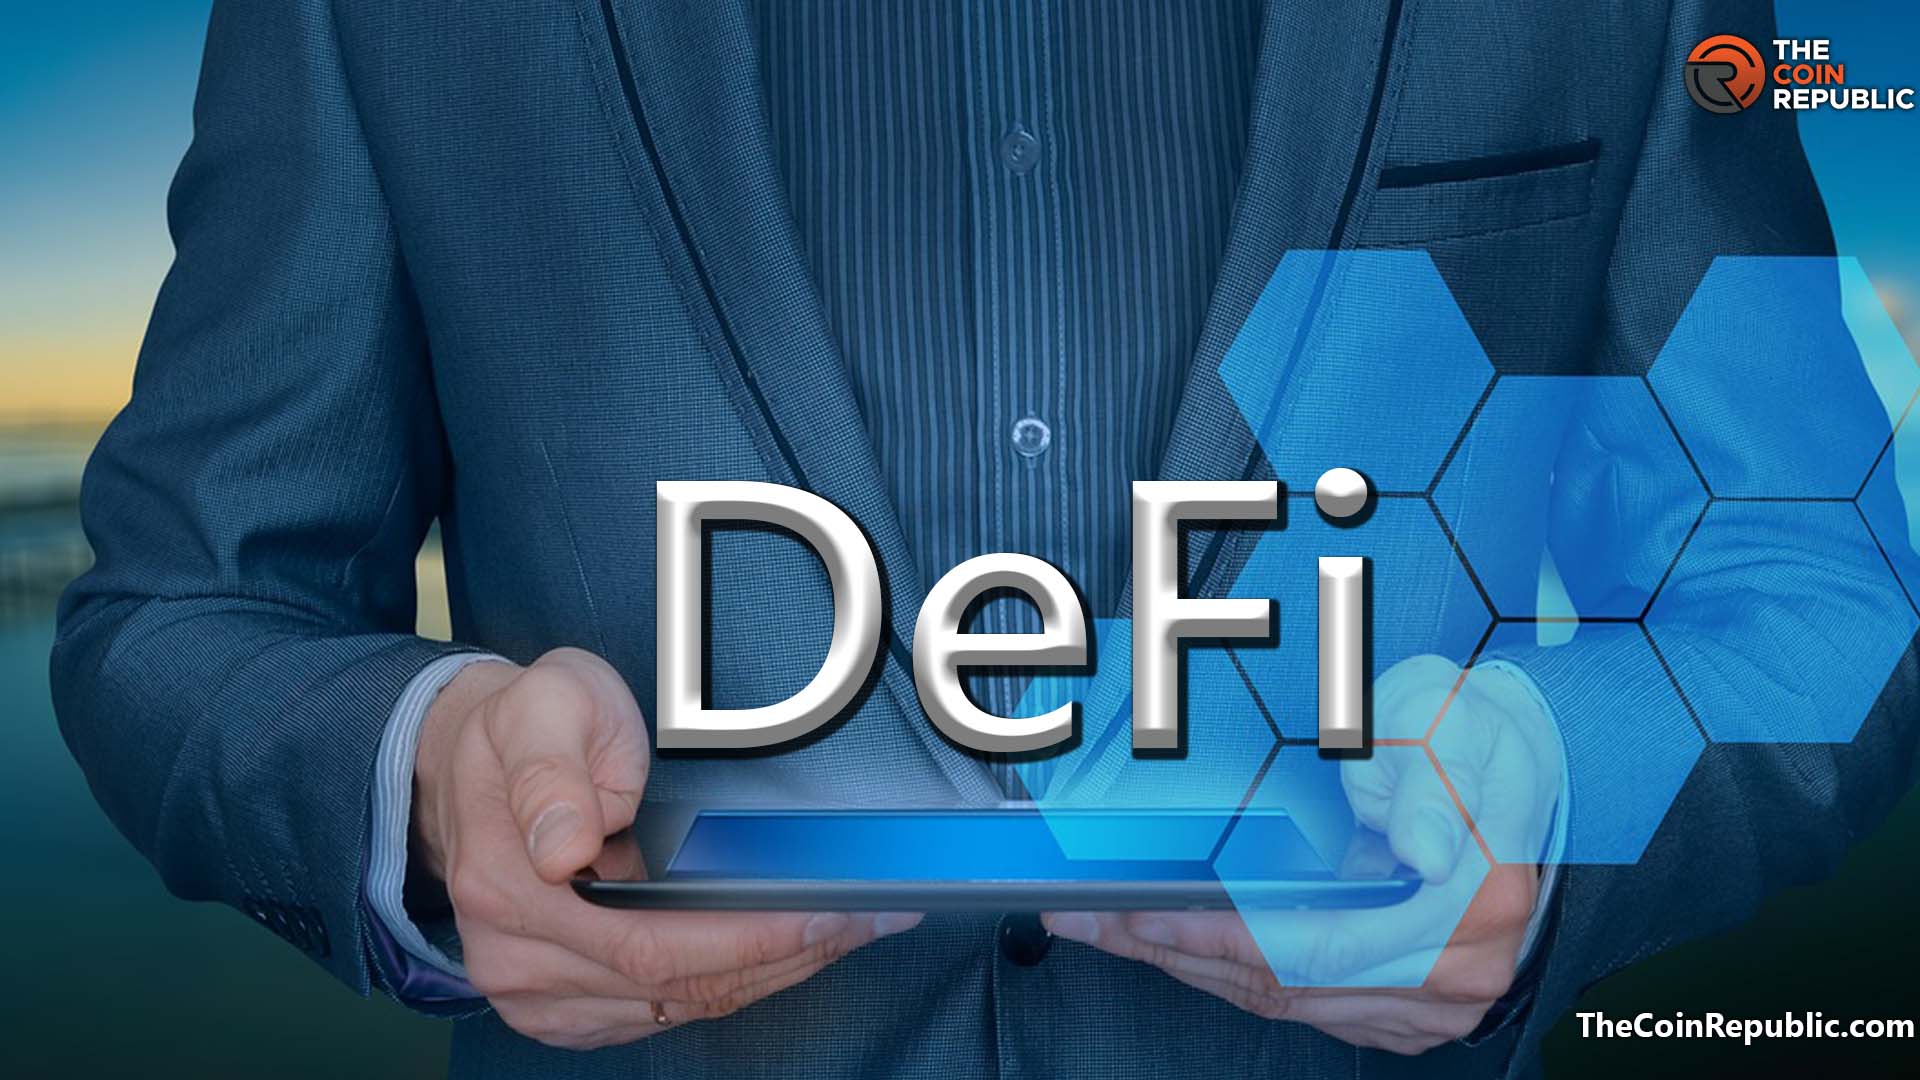 Eric Voorhees Thinks Regulators Are Unaware of How DeFi is Aiding Them